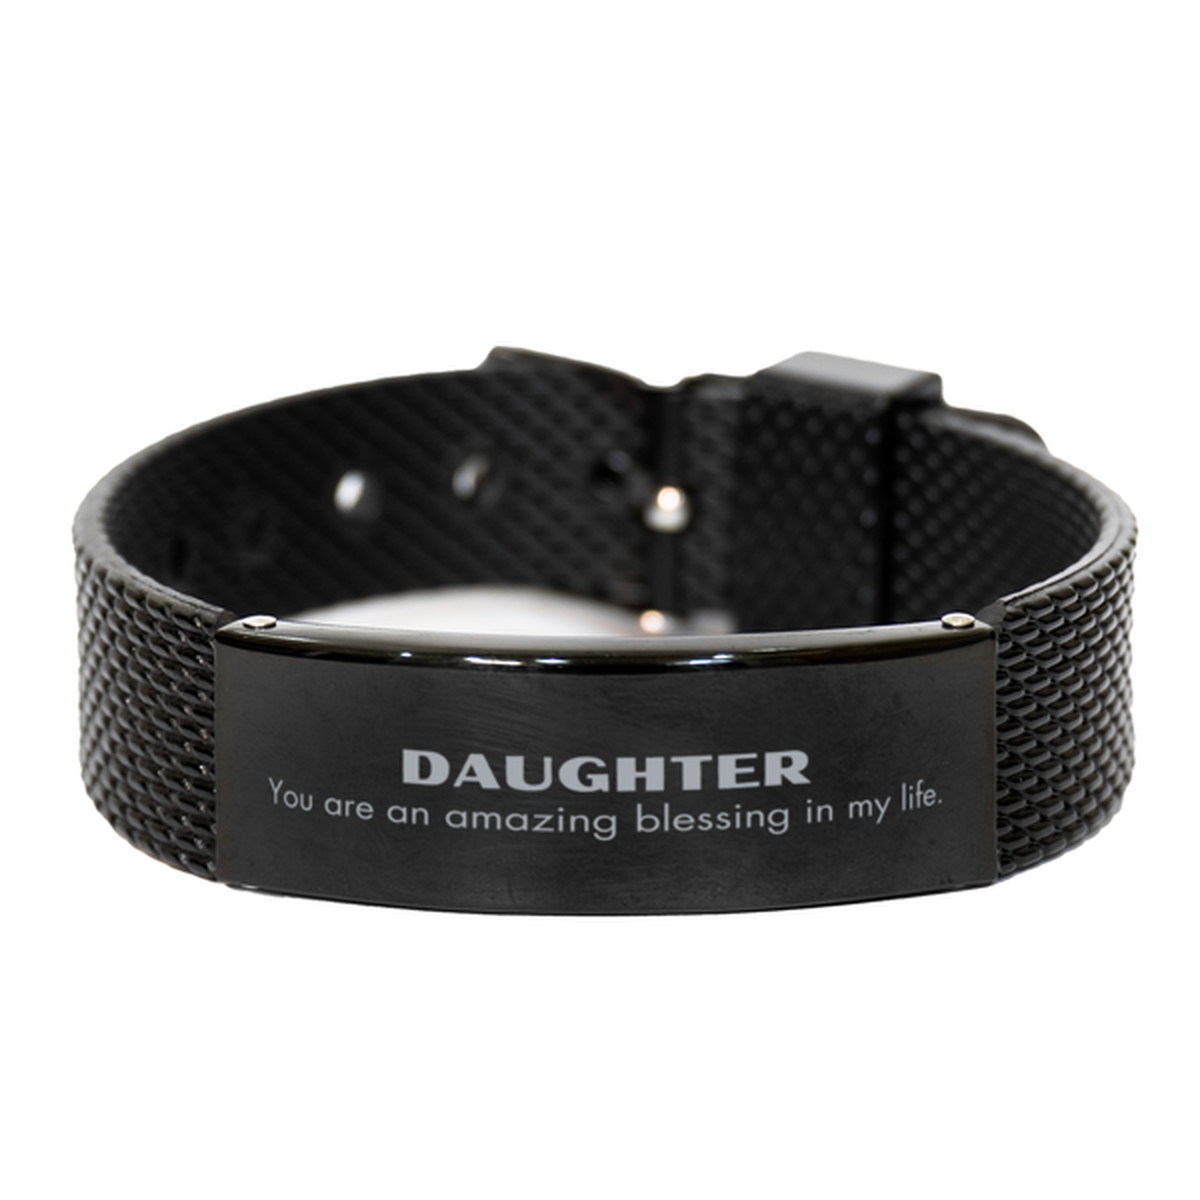 Daughter Black Shark Mesh Bracelet, You are an amazing blessing in my life, Thank You Gifts For Daughter, Inspirational Birthday Christmas Unique Gifts For Daughter